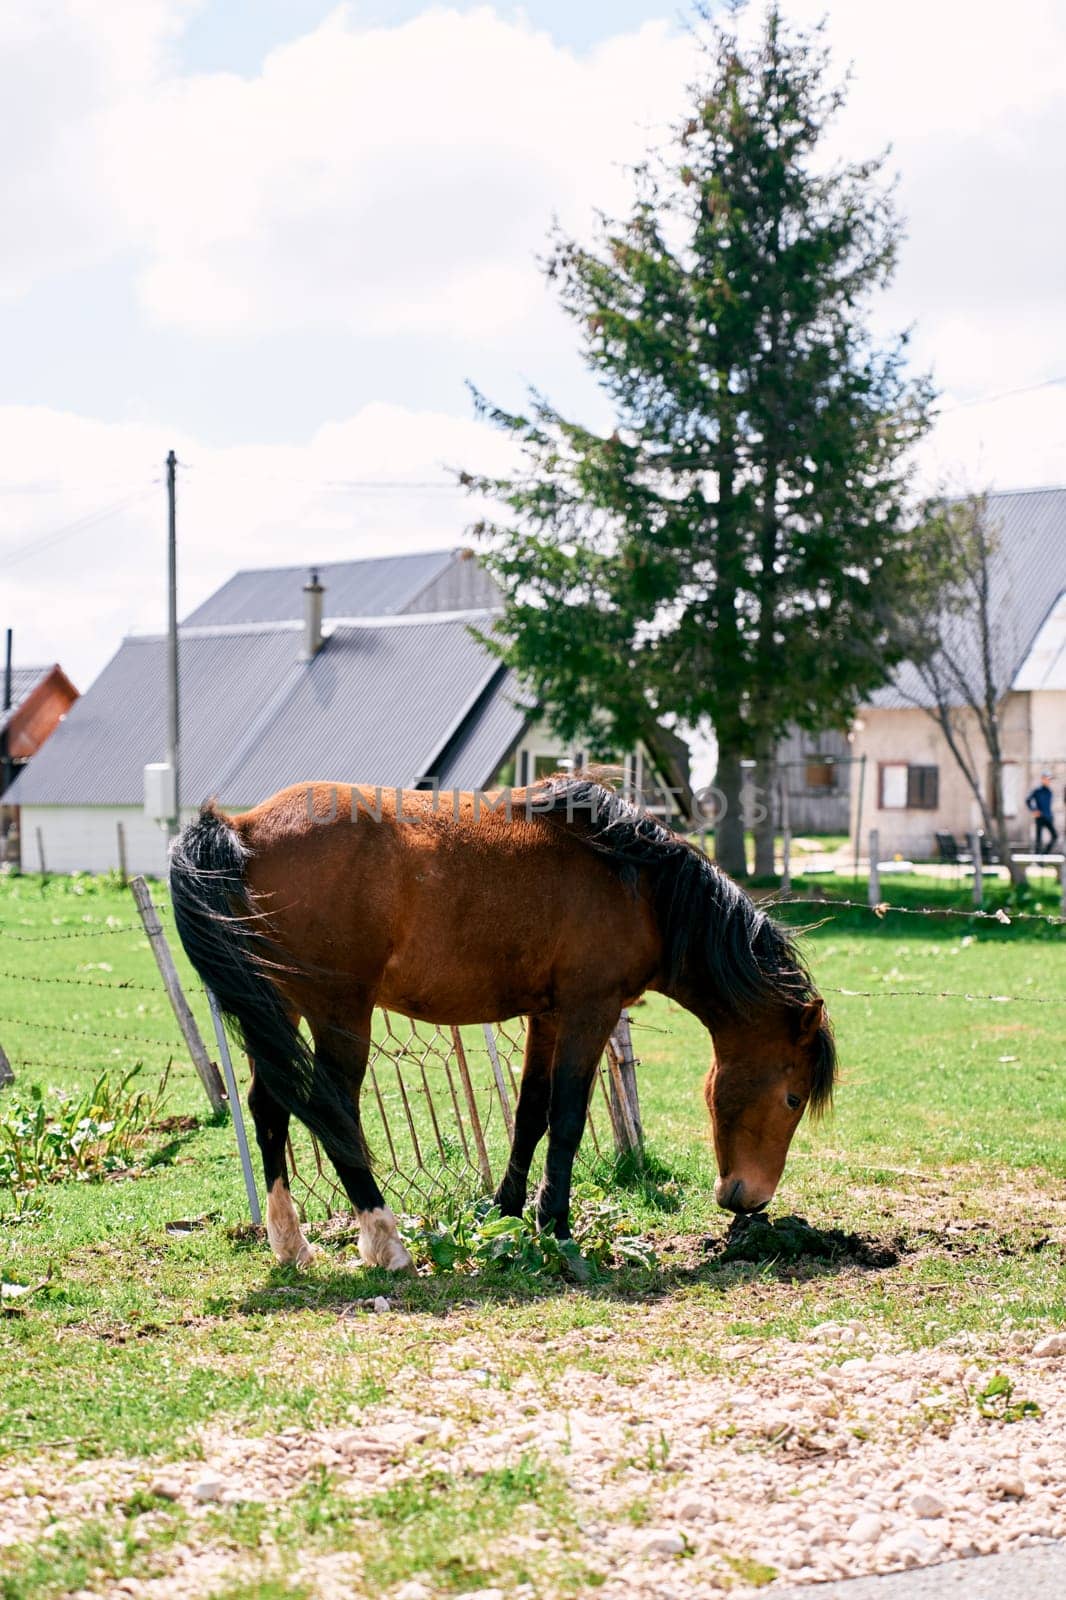 Bay horse graze on a green lawn near a fence in the village by Nadtochiy